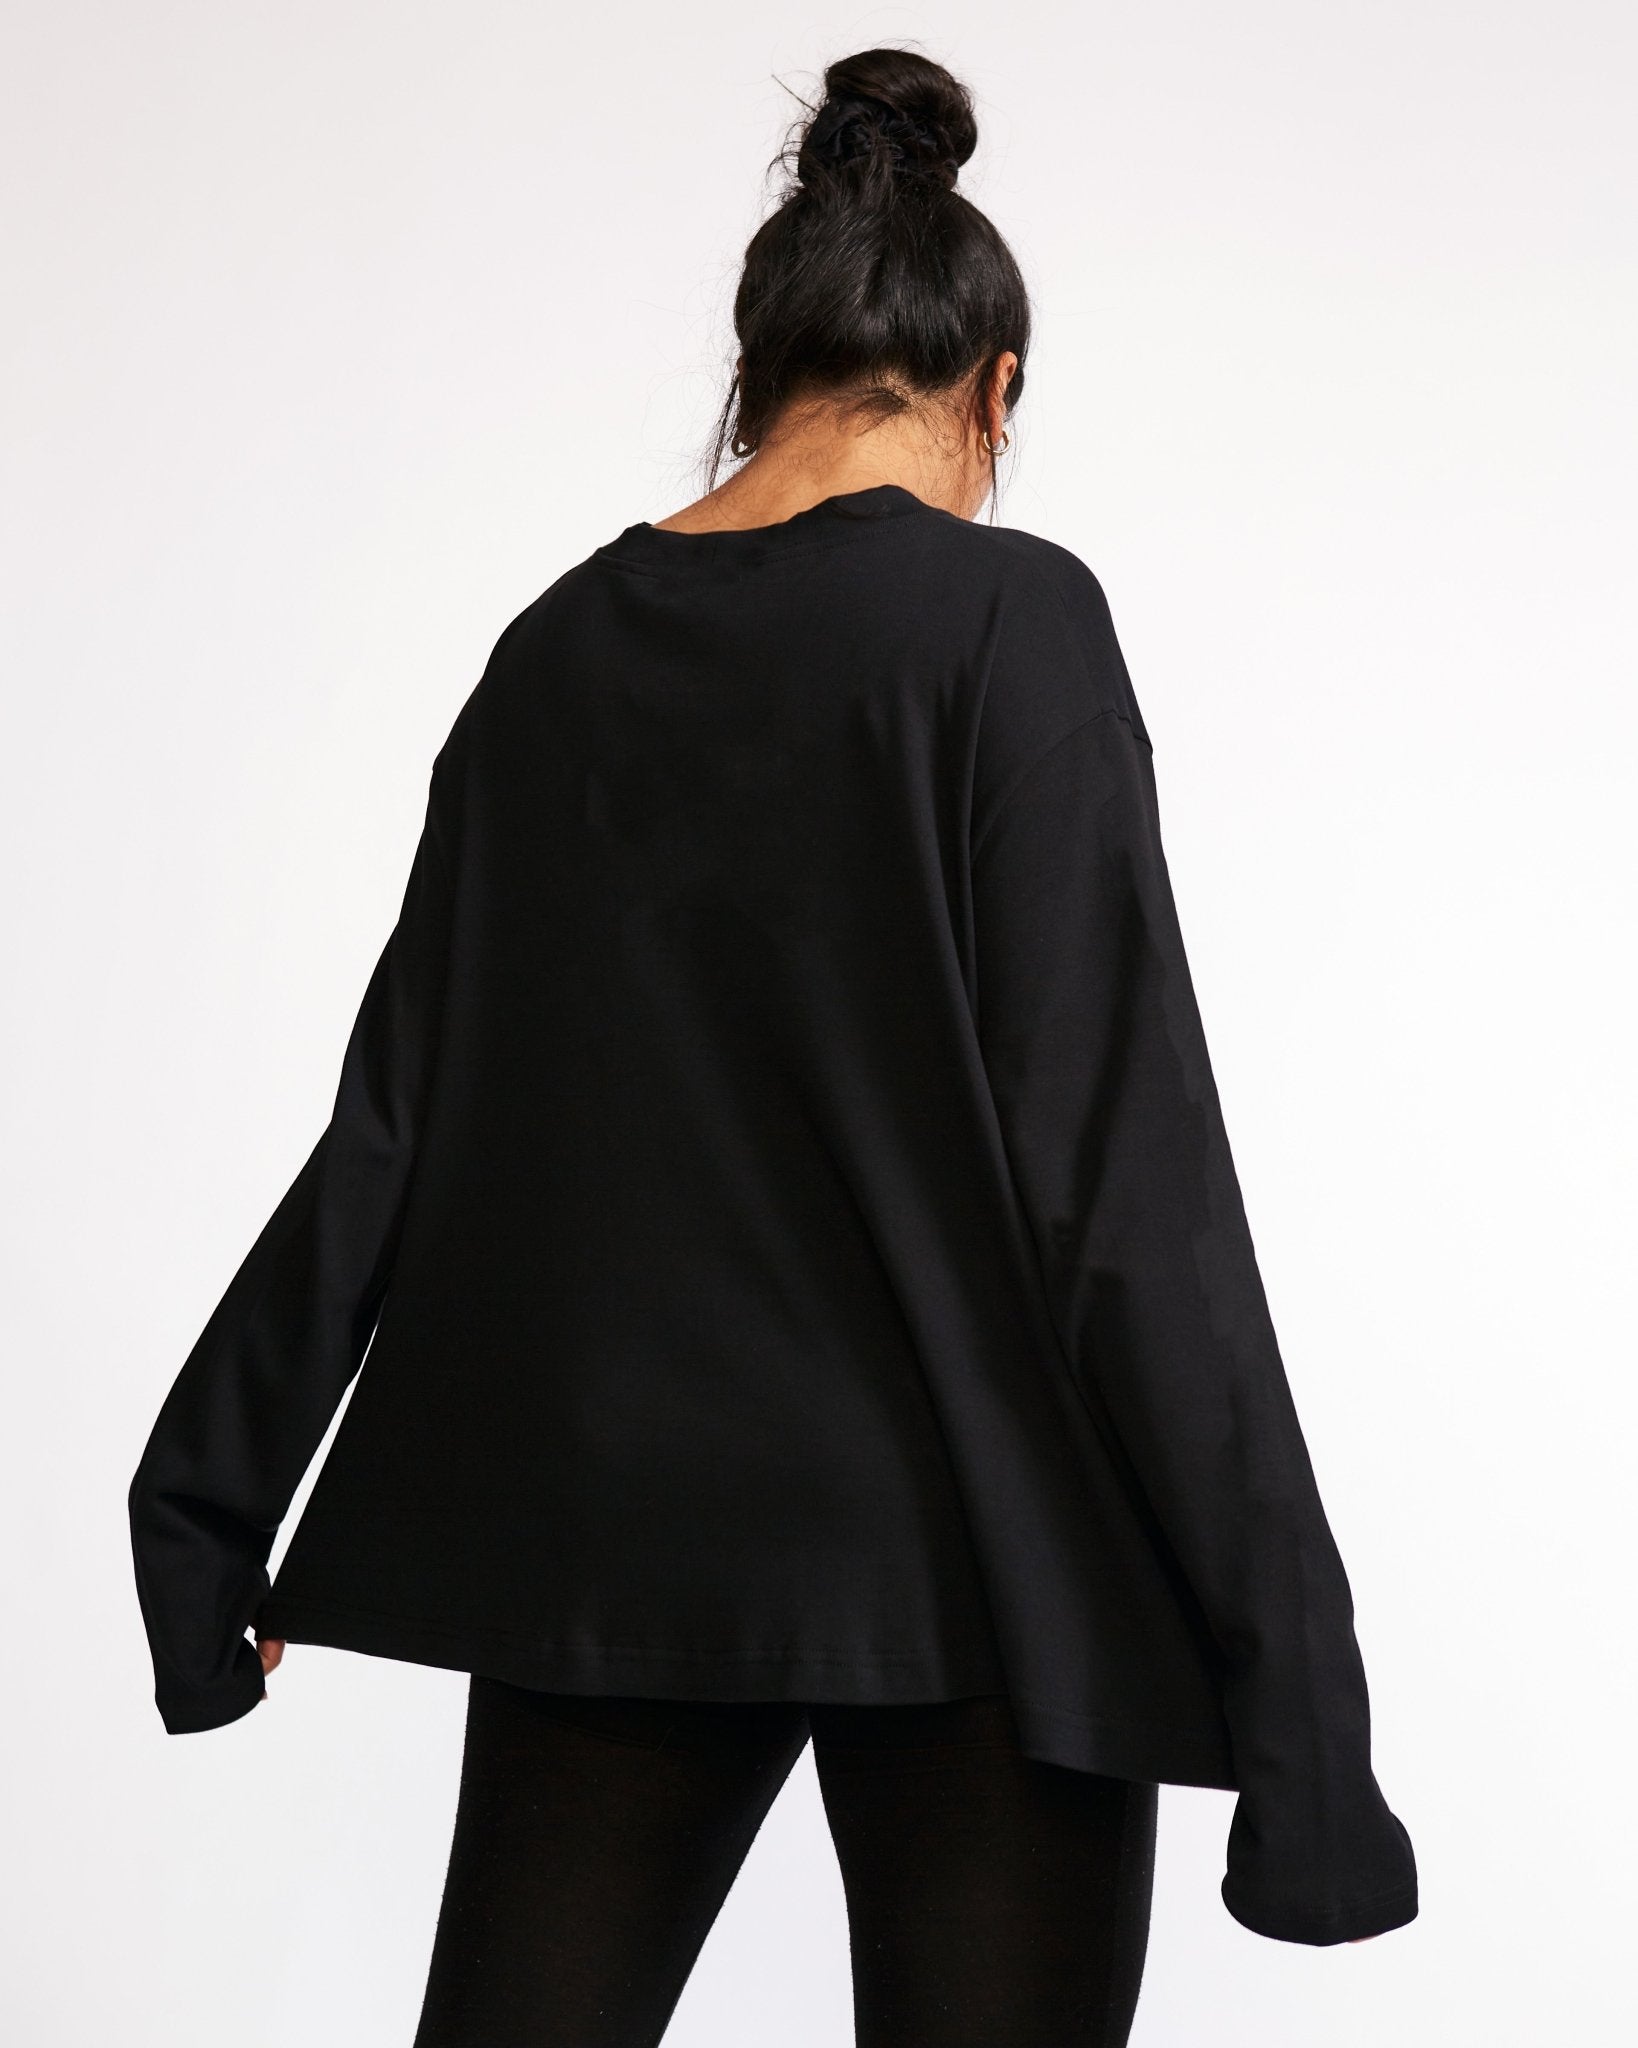 What if we take it one day at a time? Black Flowy Long Sleeve - OBLIVIOUS?